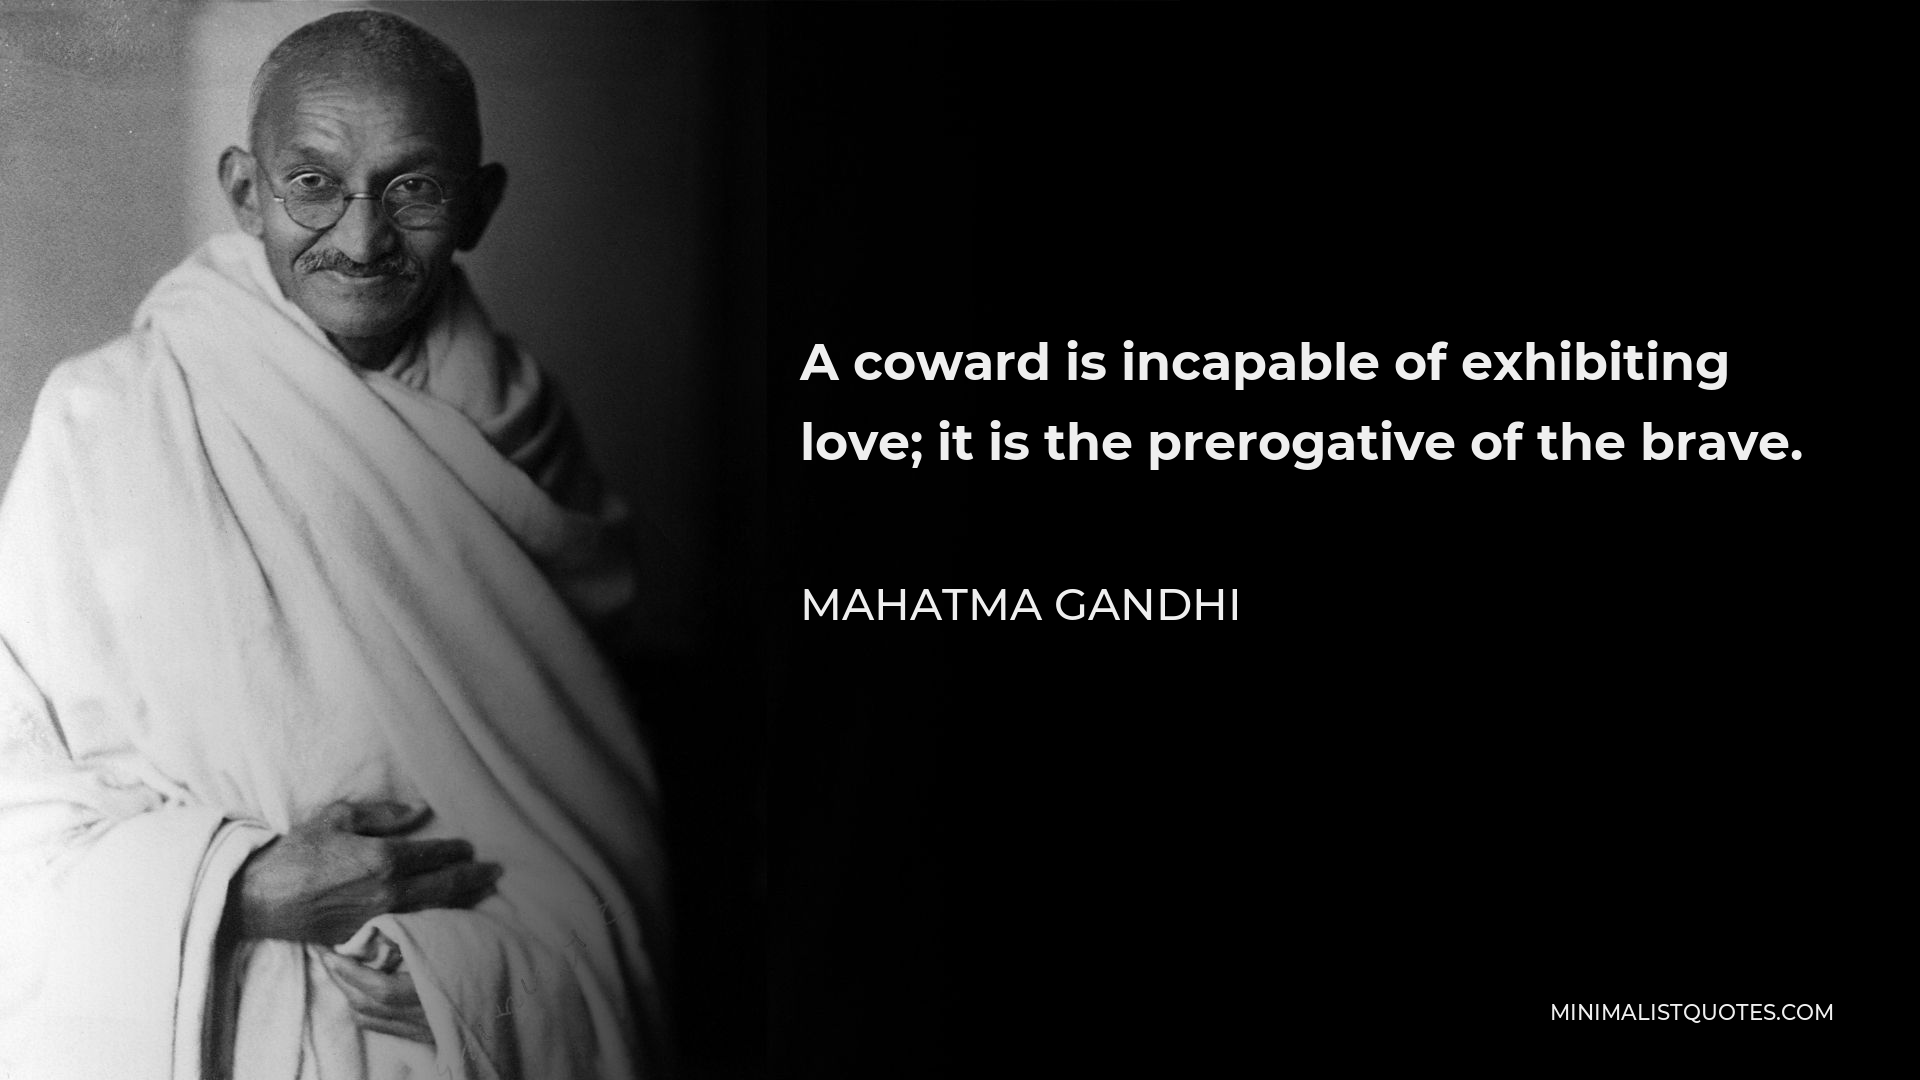 Mahatma Gandhi Quote - A coward is incapable of exhibiting love; it is the prerogative of the brave.